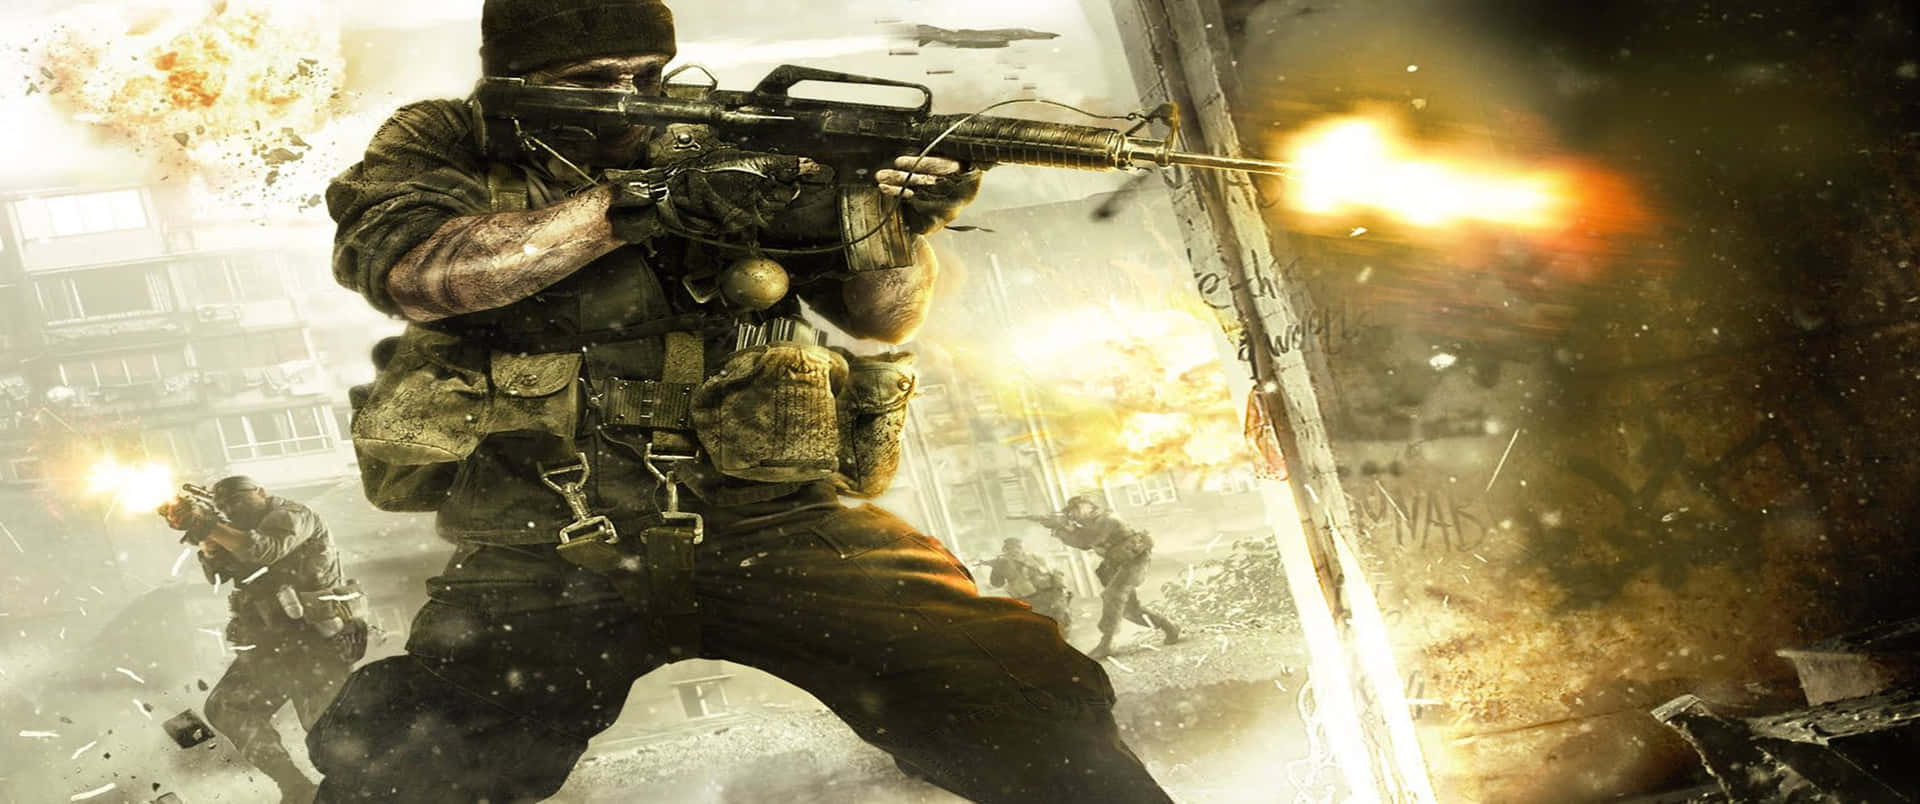 3440x1440p Ragged Call Of Duty Black Ops Cold War Background